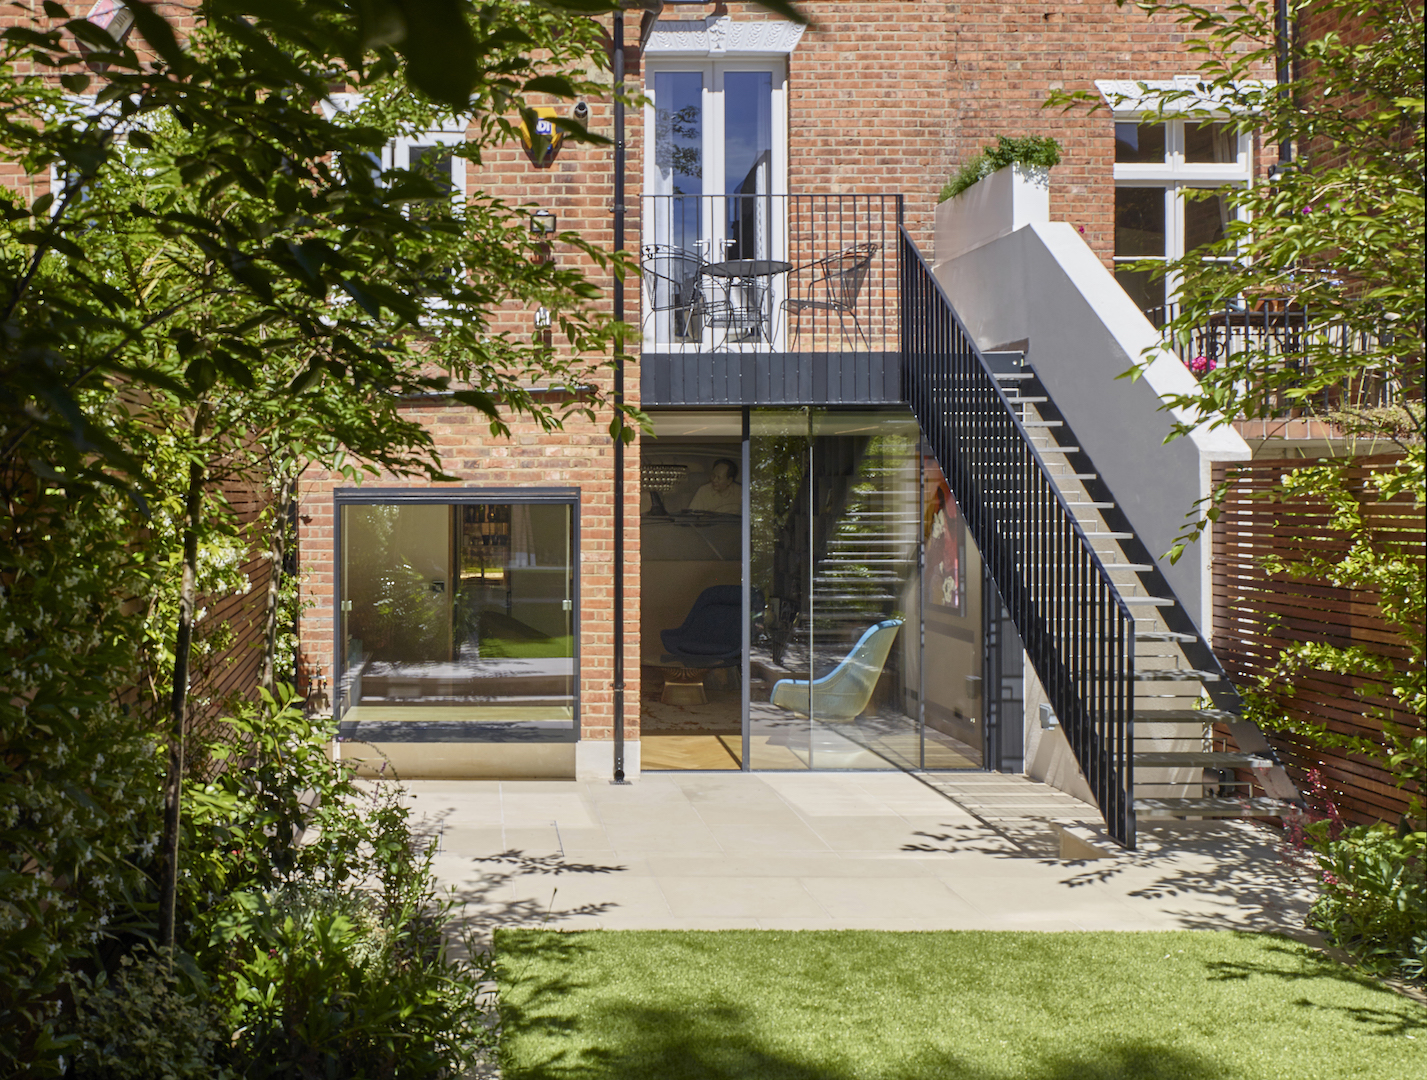 full renovation townhouse in Hampstead including Boffi kitchen and bespoke staircase by minimalist London architect practice Thompson + Baroni architects 